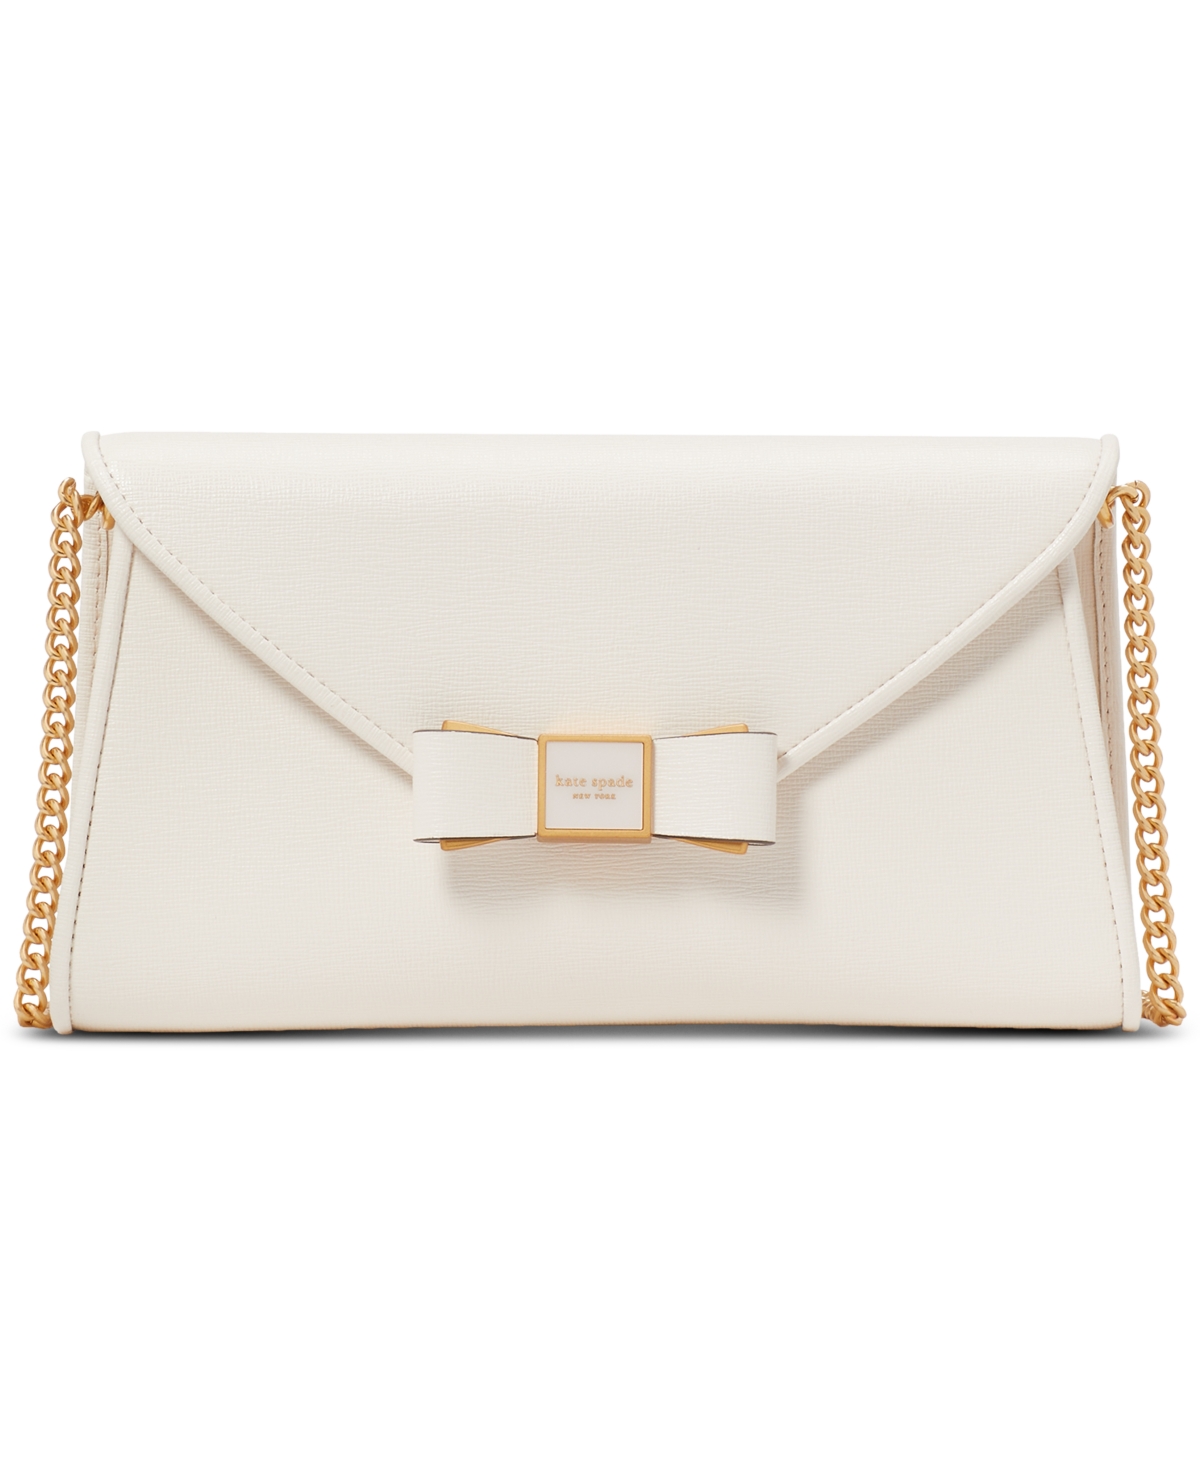 Kate Spade Morgan Bow Embellished Saffiano Leather Envelope Flap Small Crossbody In Parchment.